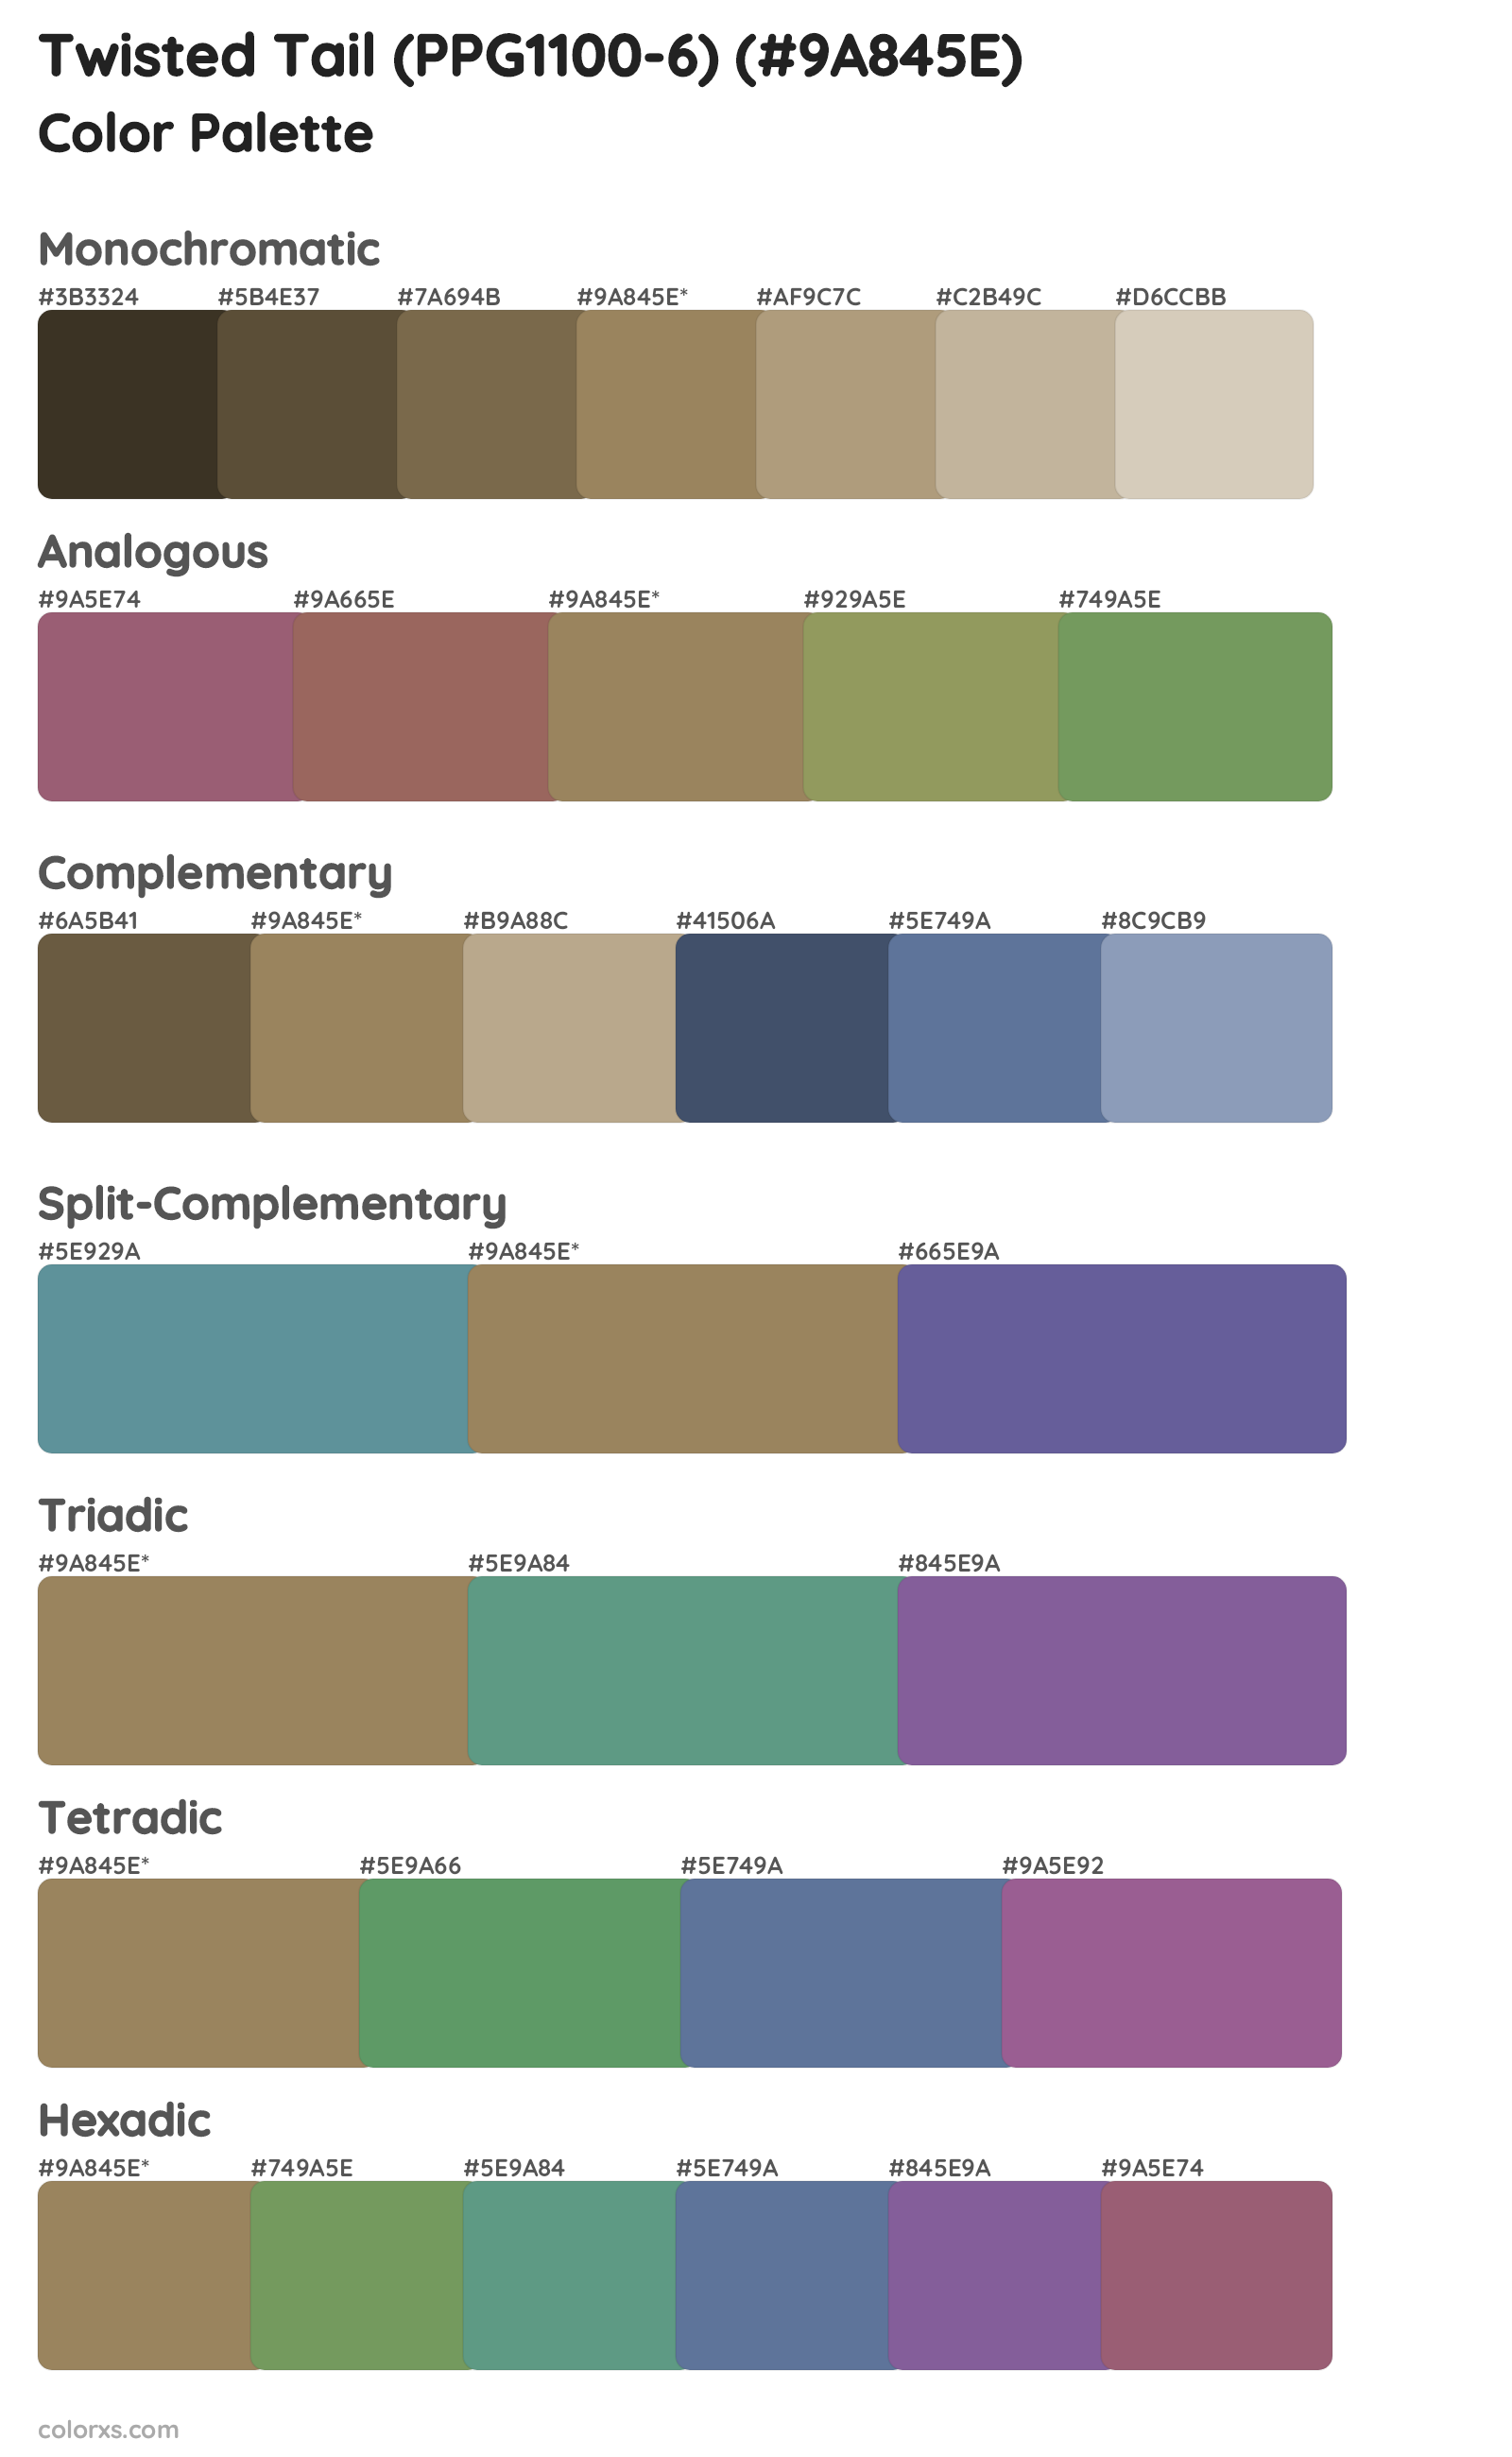 Twisted Tail (PPG1100-6) Color Scheme Palettes